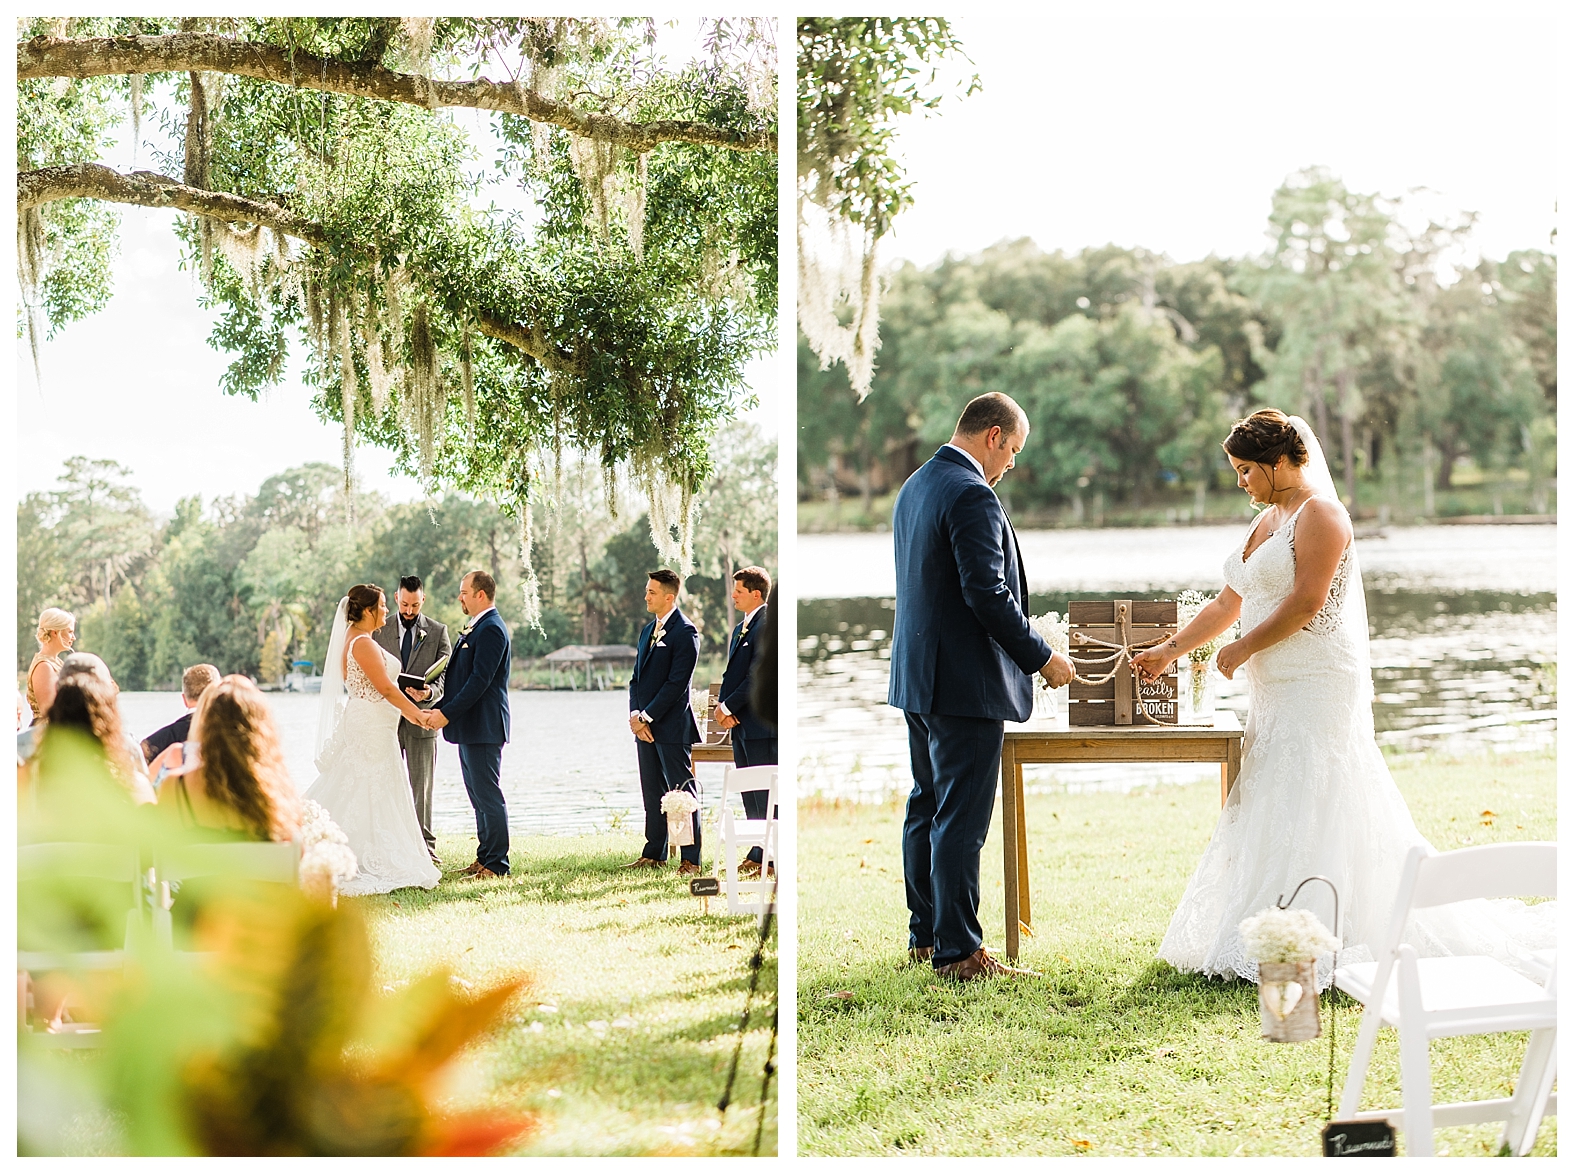 The Ceremony Events - Sara and Chad - Tampa Wedding Photographer